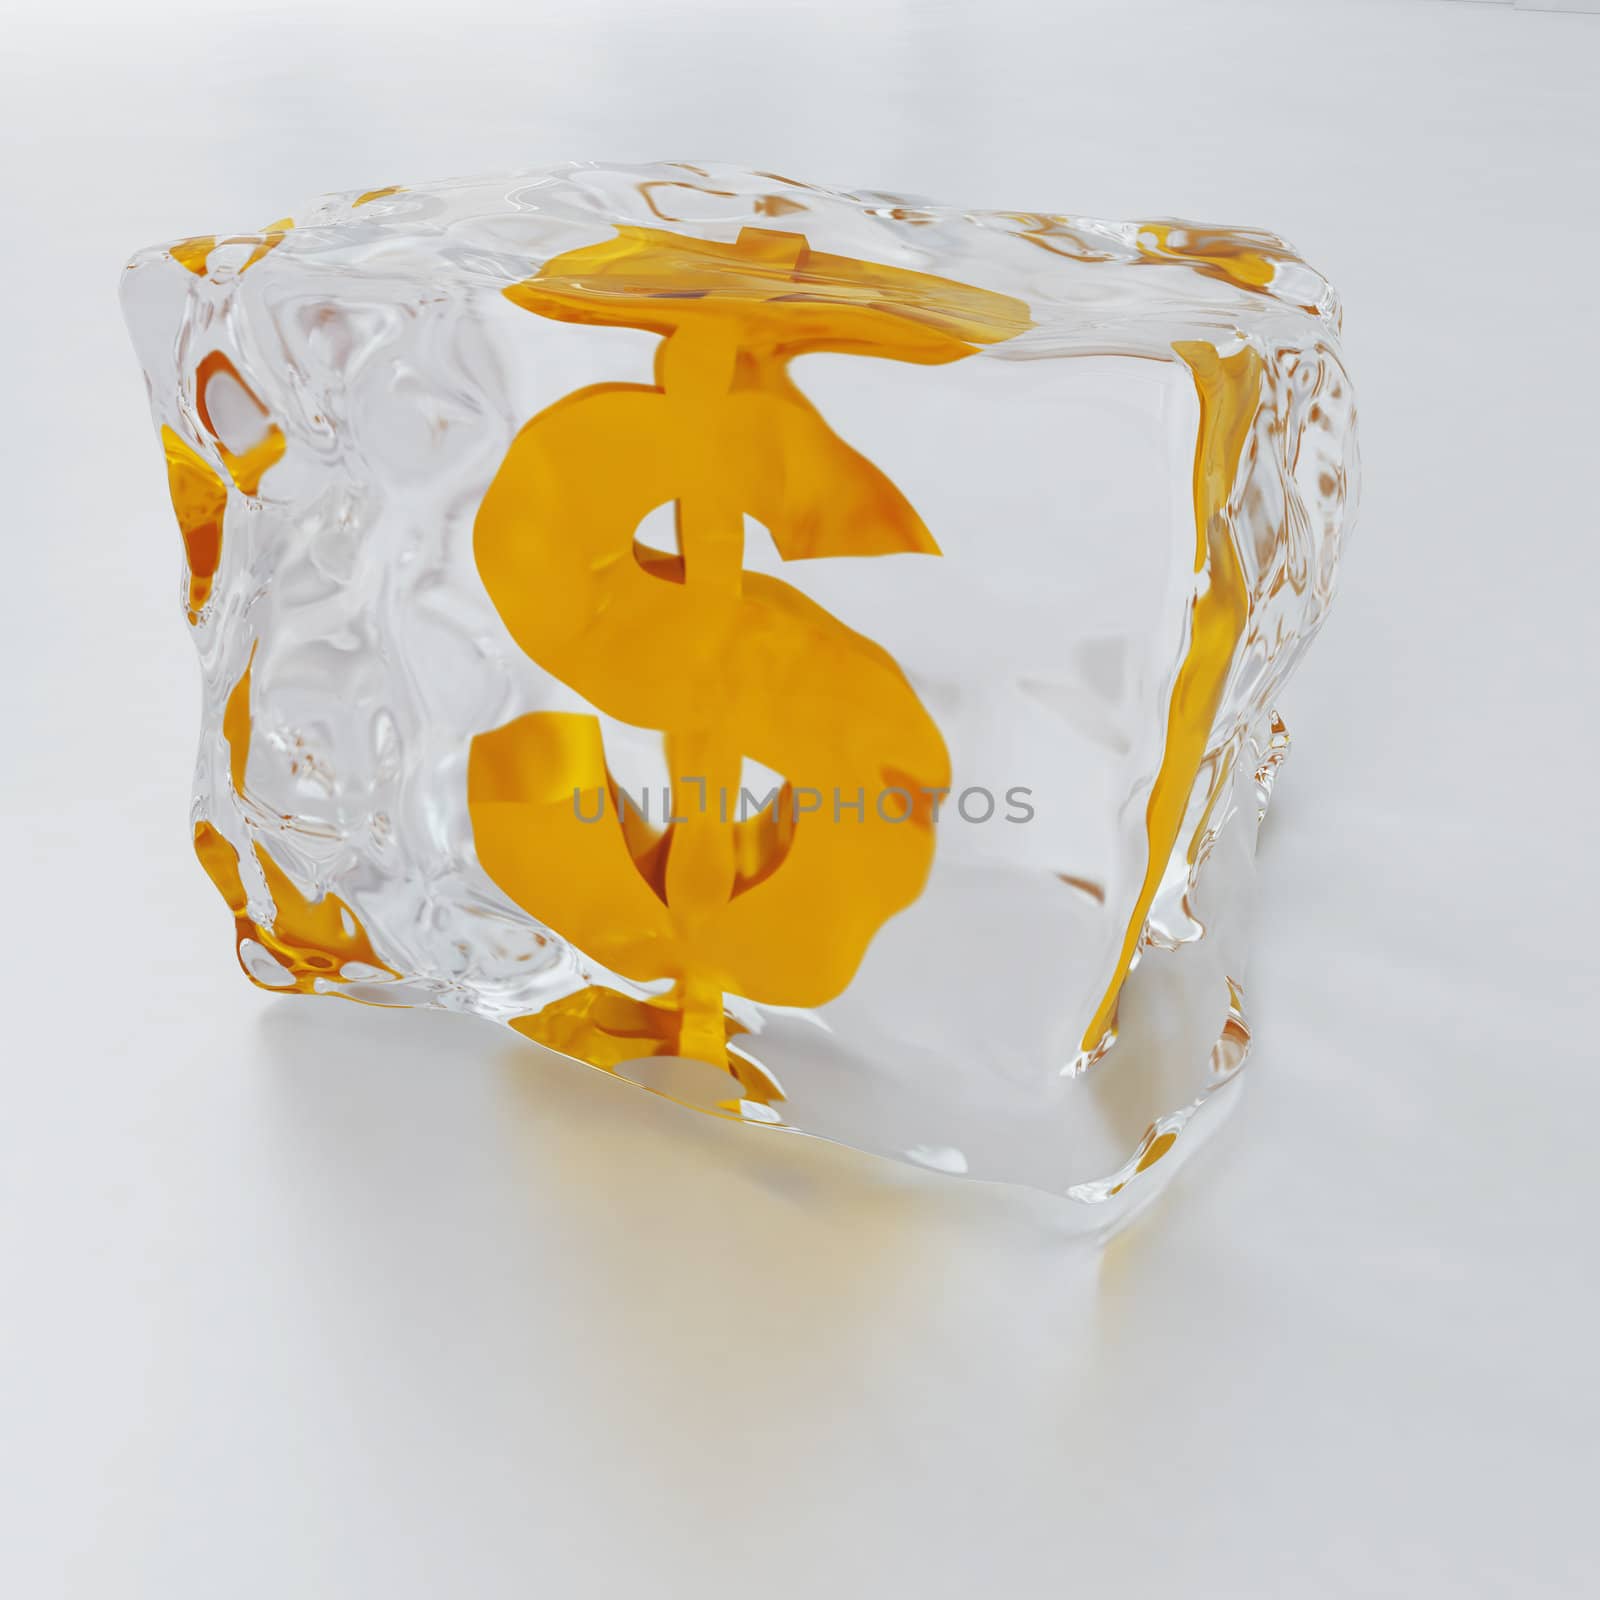 block of ice with symbol of dollar frozen inwardly on a light background